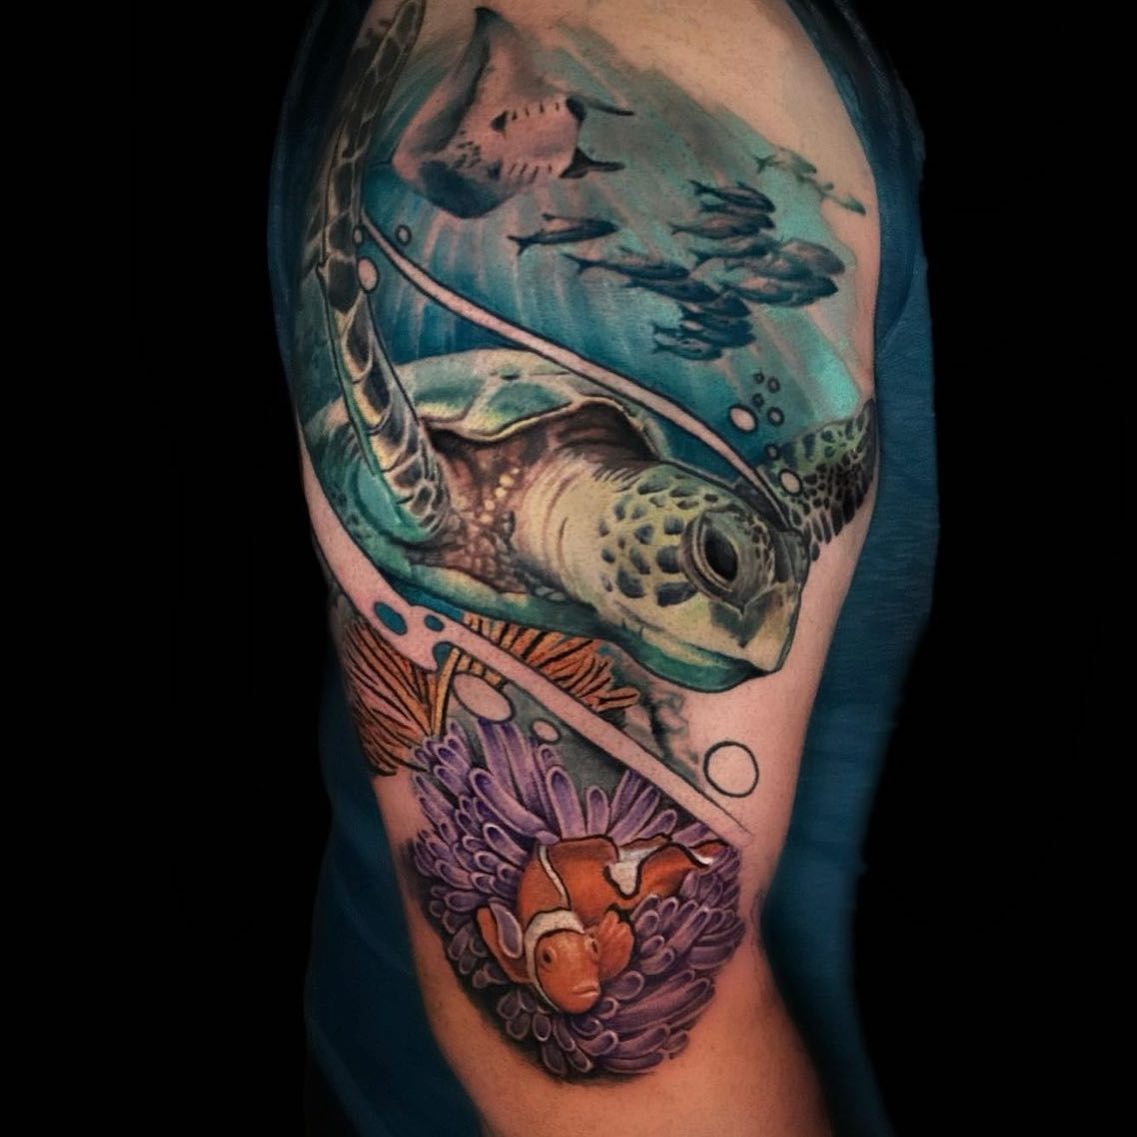 The ocean is such a magical and beautiful place on earth. That's why, it's great to pay tribute to that by getting a tattoo of some sea animals or plants. In the design above, the sea turtle is on the foreground. Let's have fun with it!